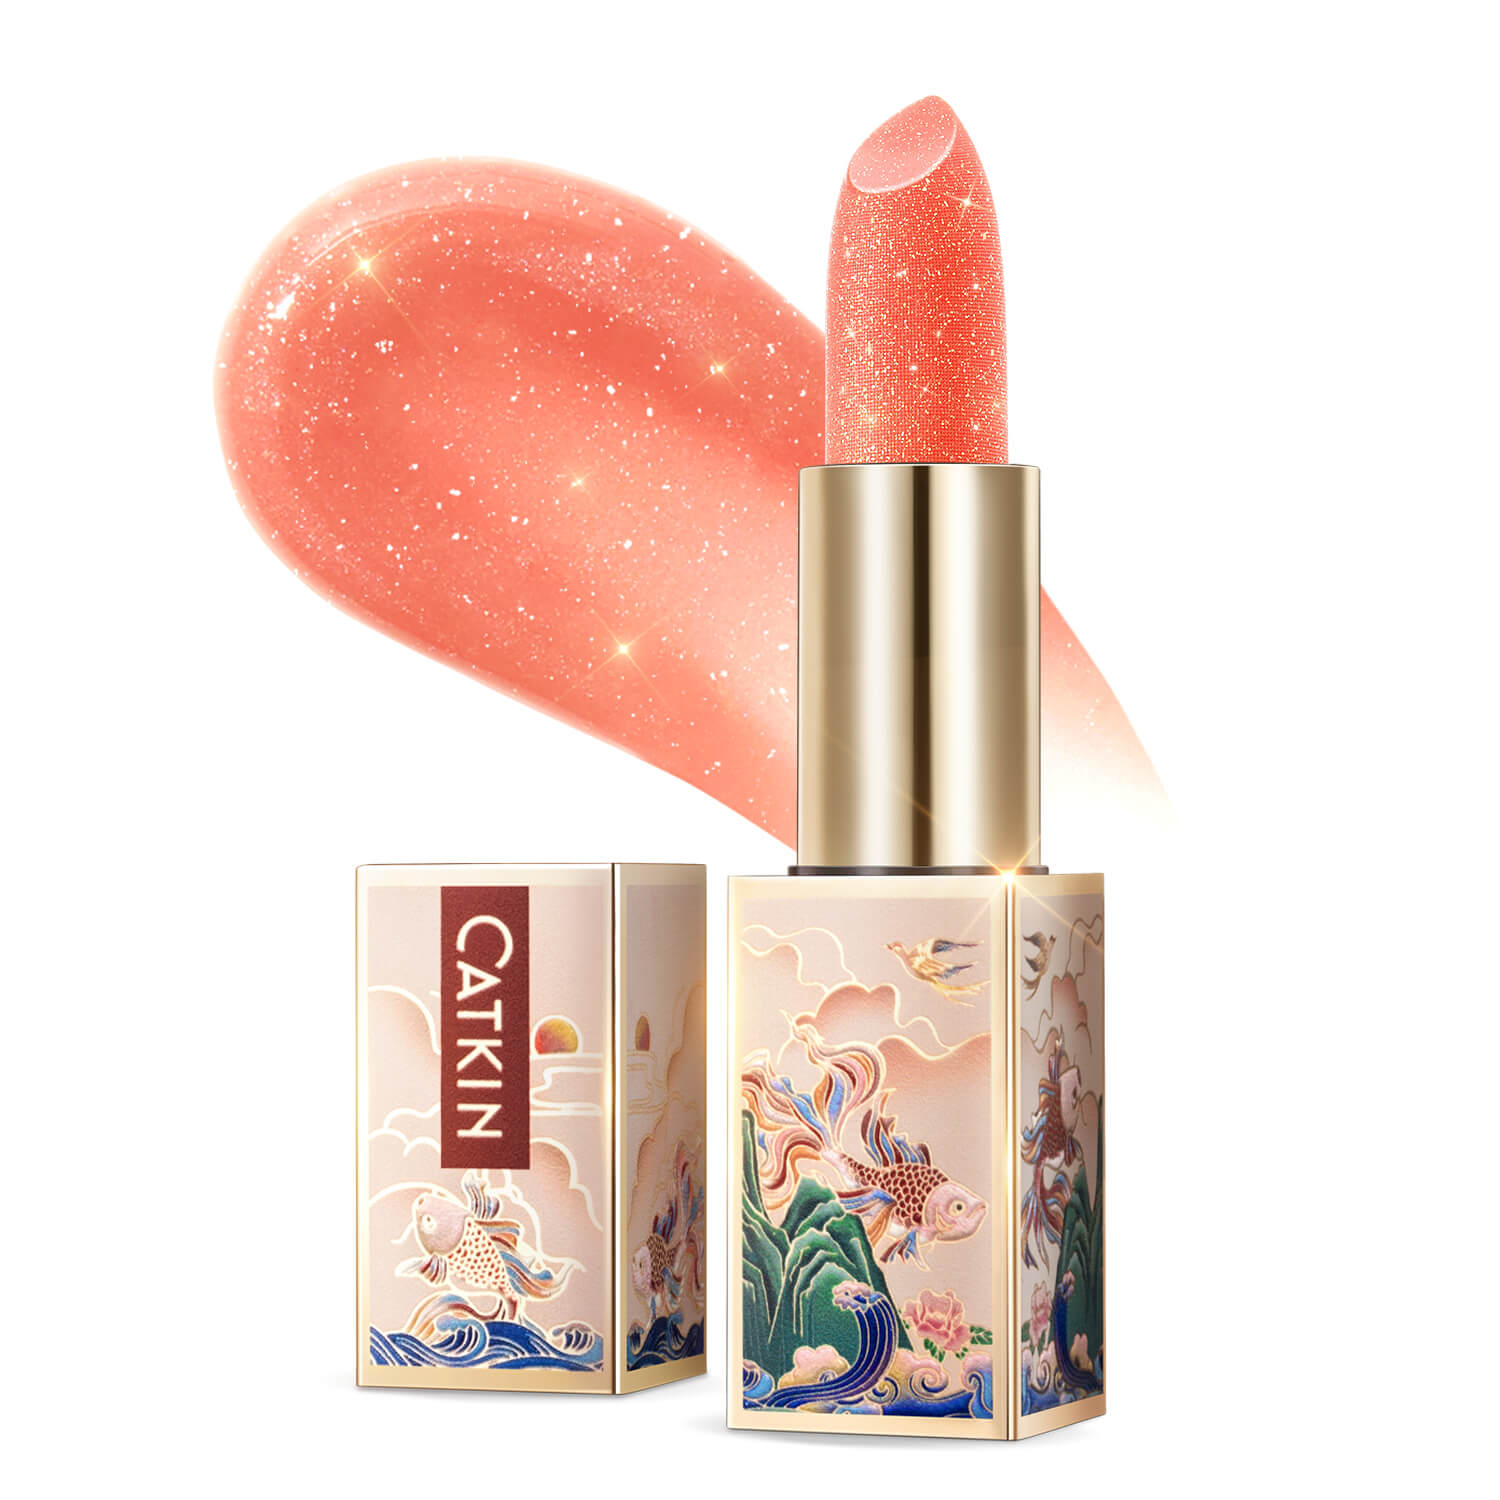 CATKIN Tinted Lip Balm Color Changing Lipstick Ultra Hydrating Natural Lip Moistrurizer with Vitamin E Nourishing For Cracked & Dry Lips